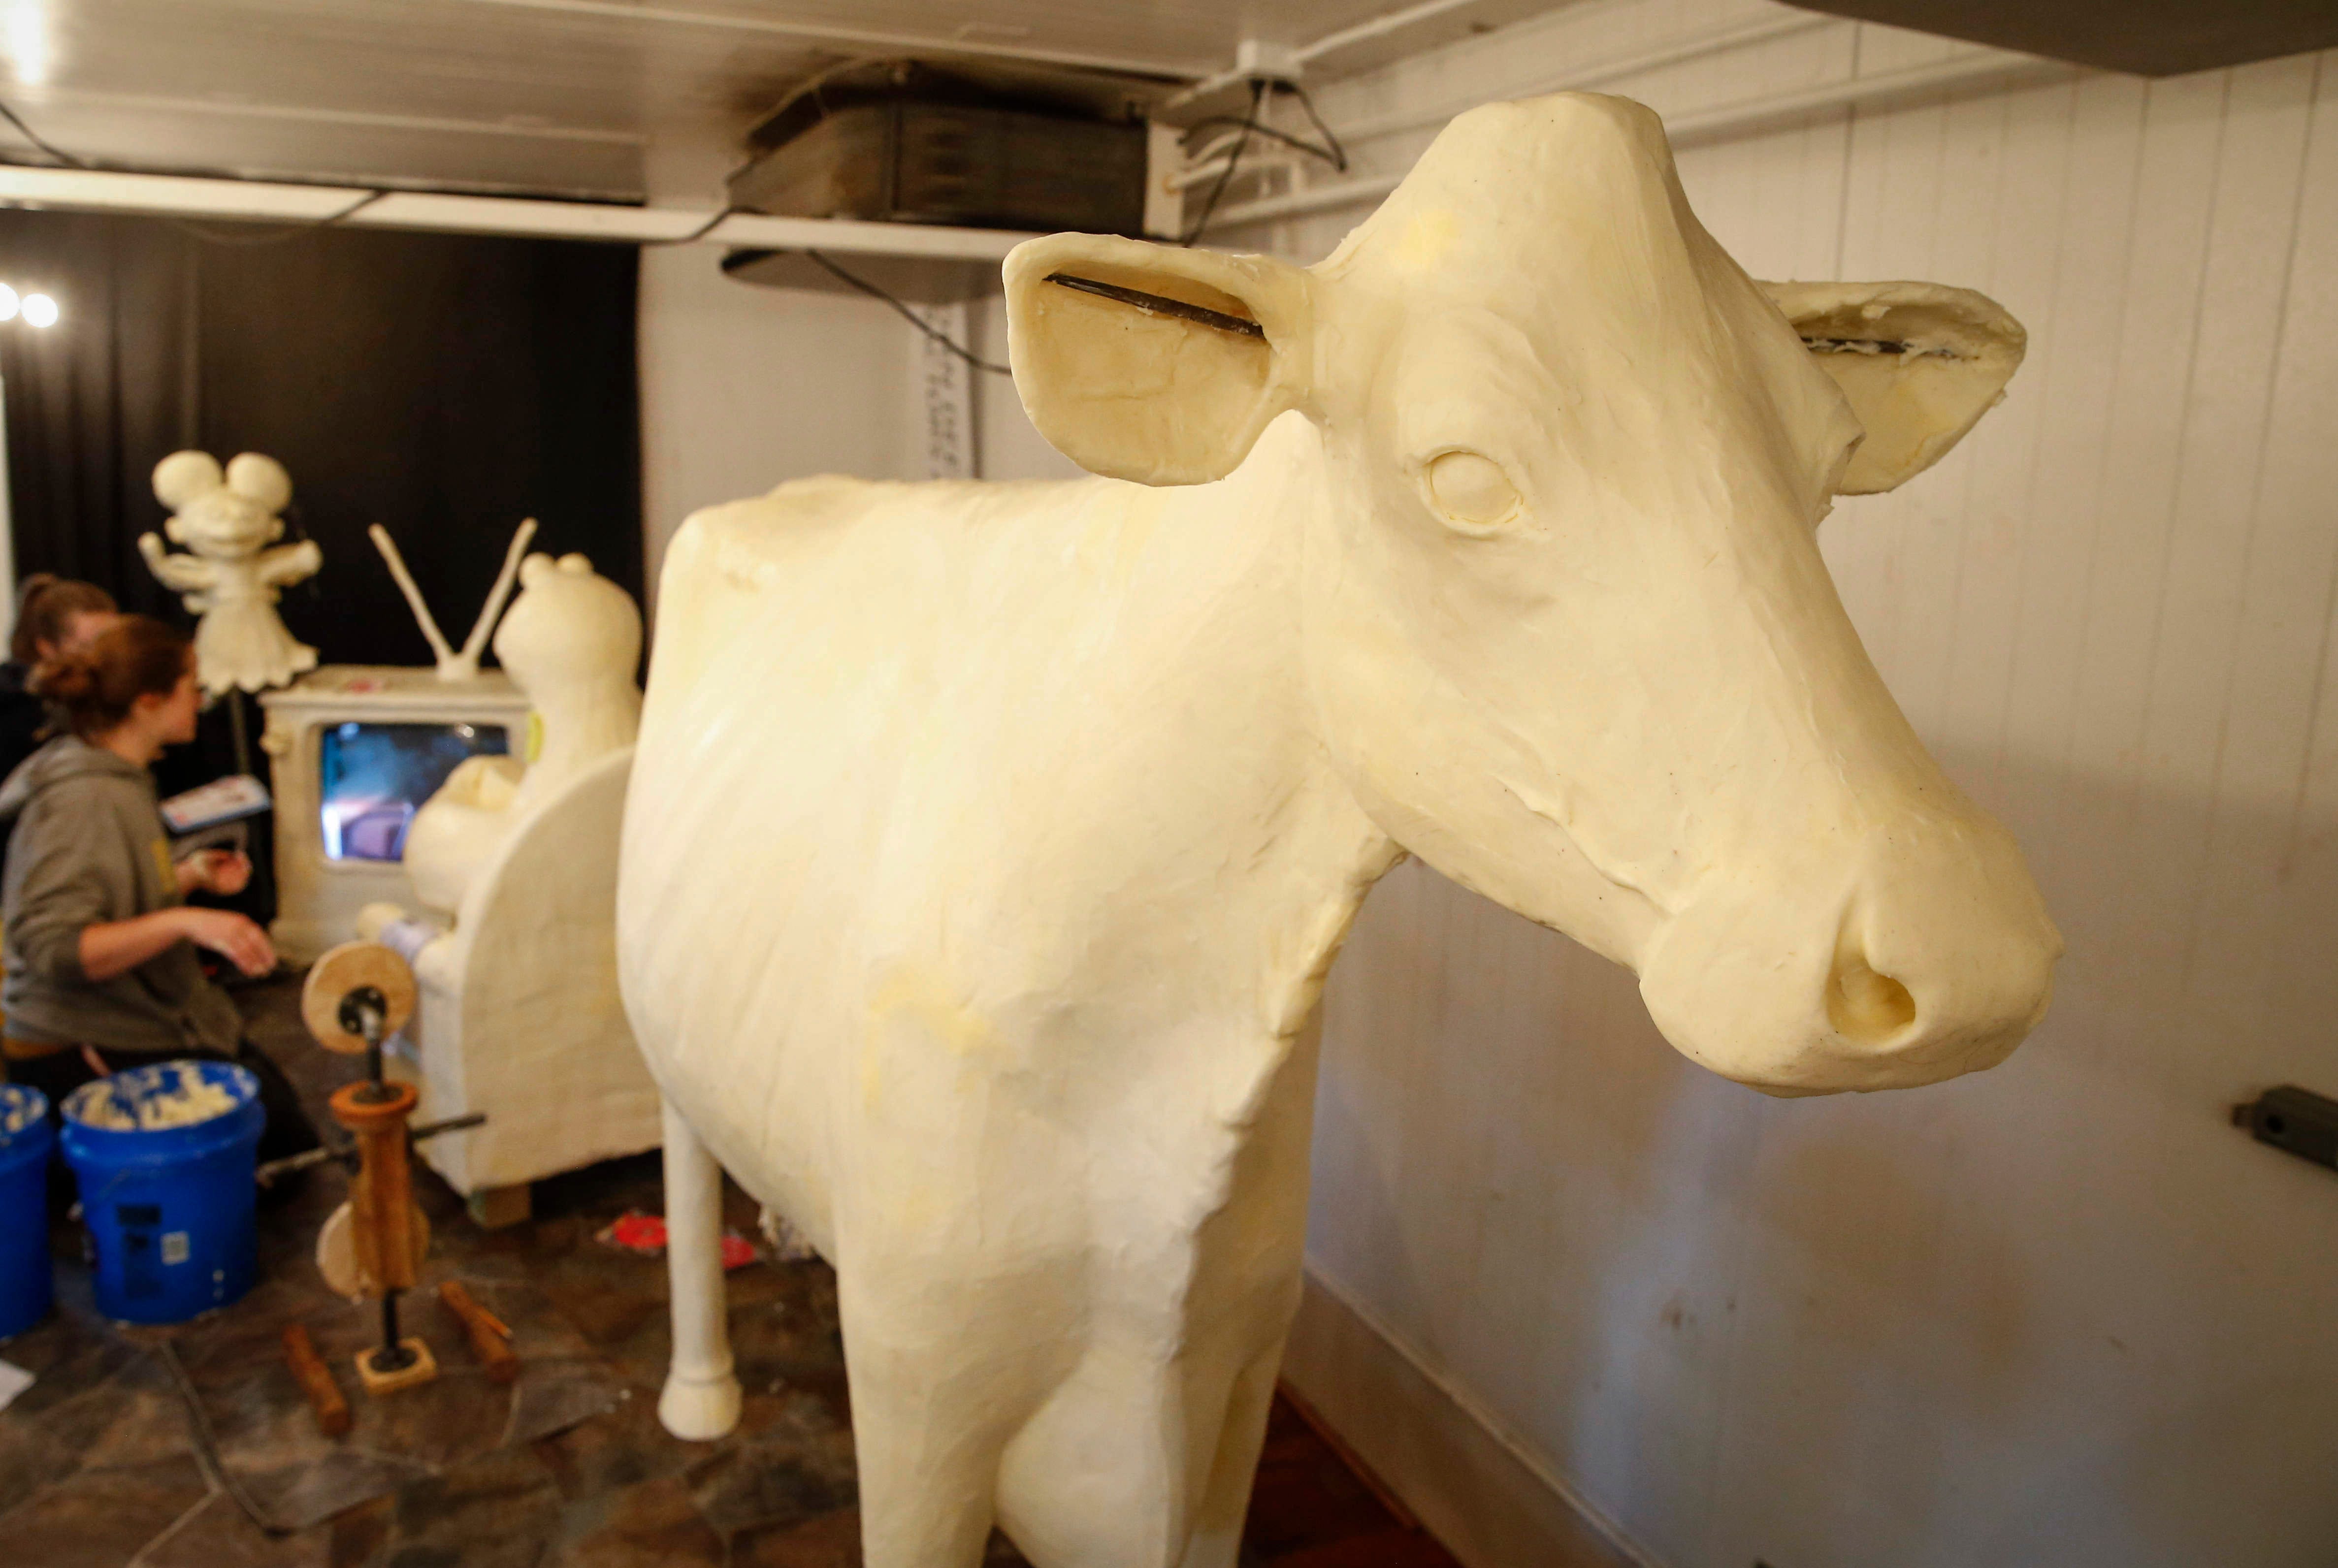 Iowa State Fair butter sculptor and family embrace dairyfree summer